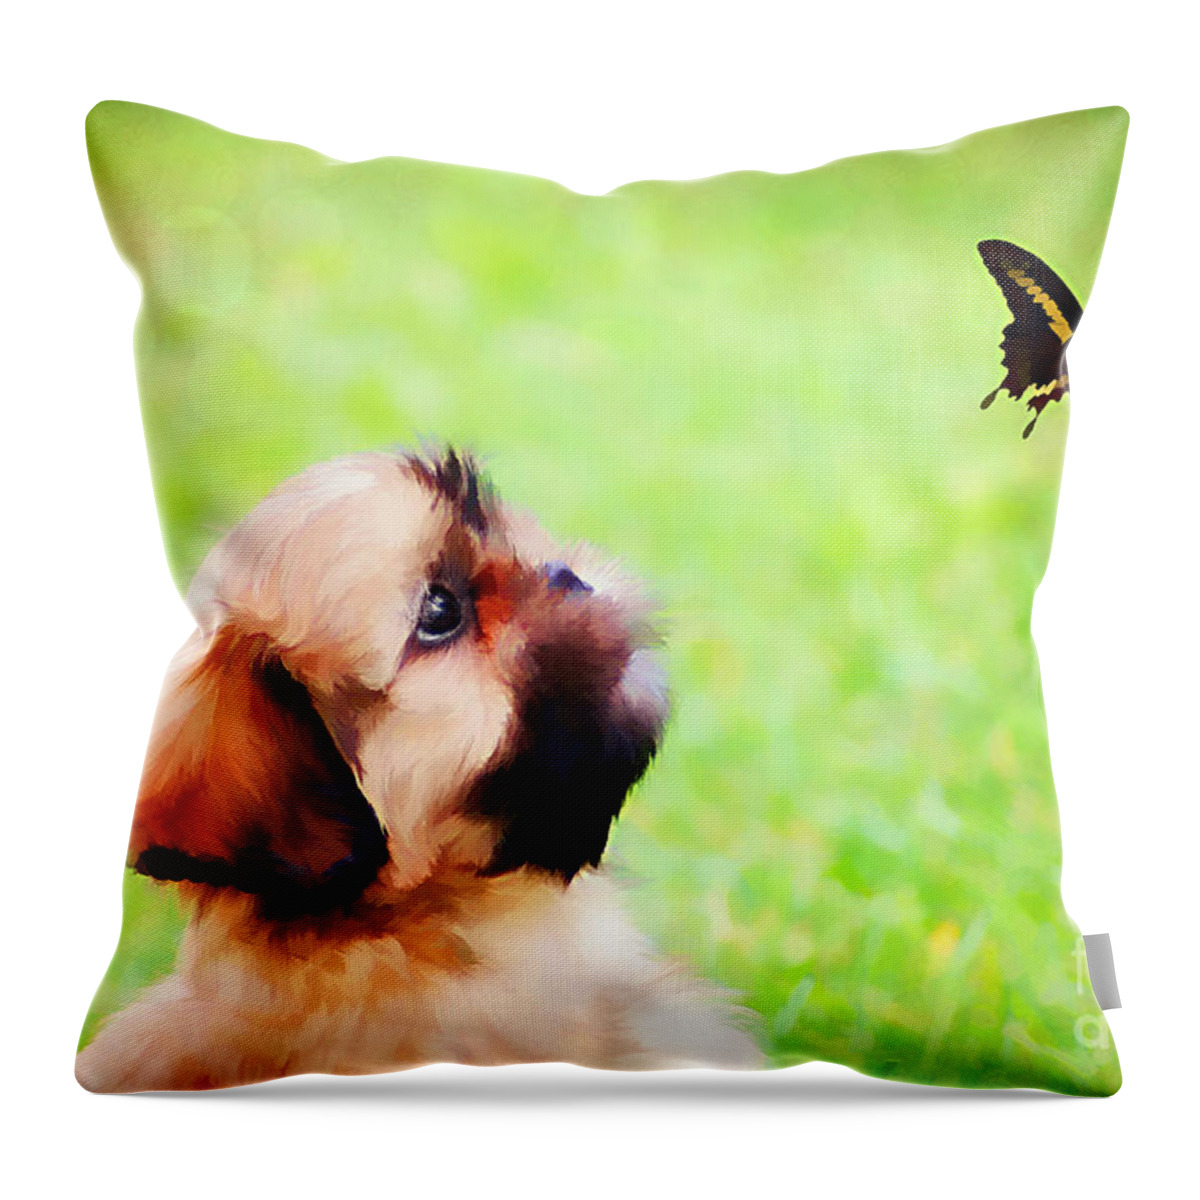 Adorable Throw Pillow featuring the photograph Watching Butterflies by Darren Fisher